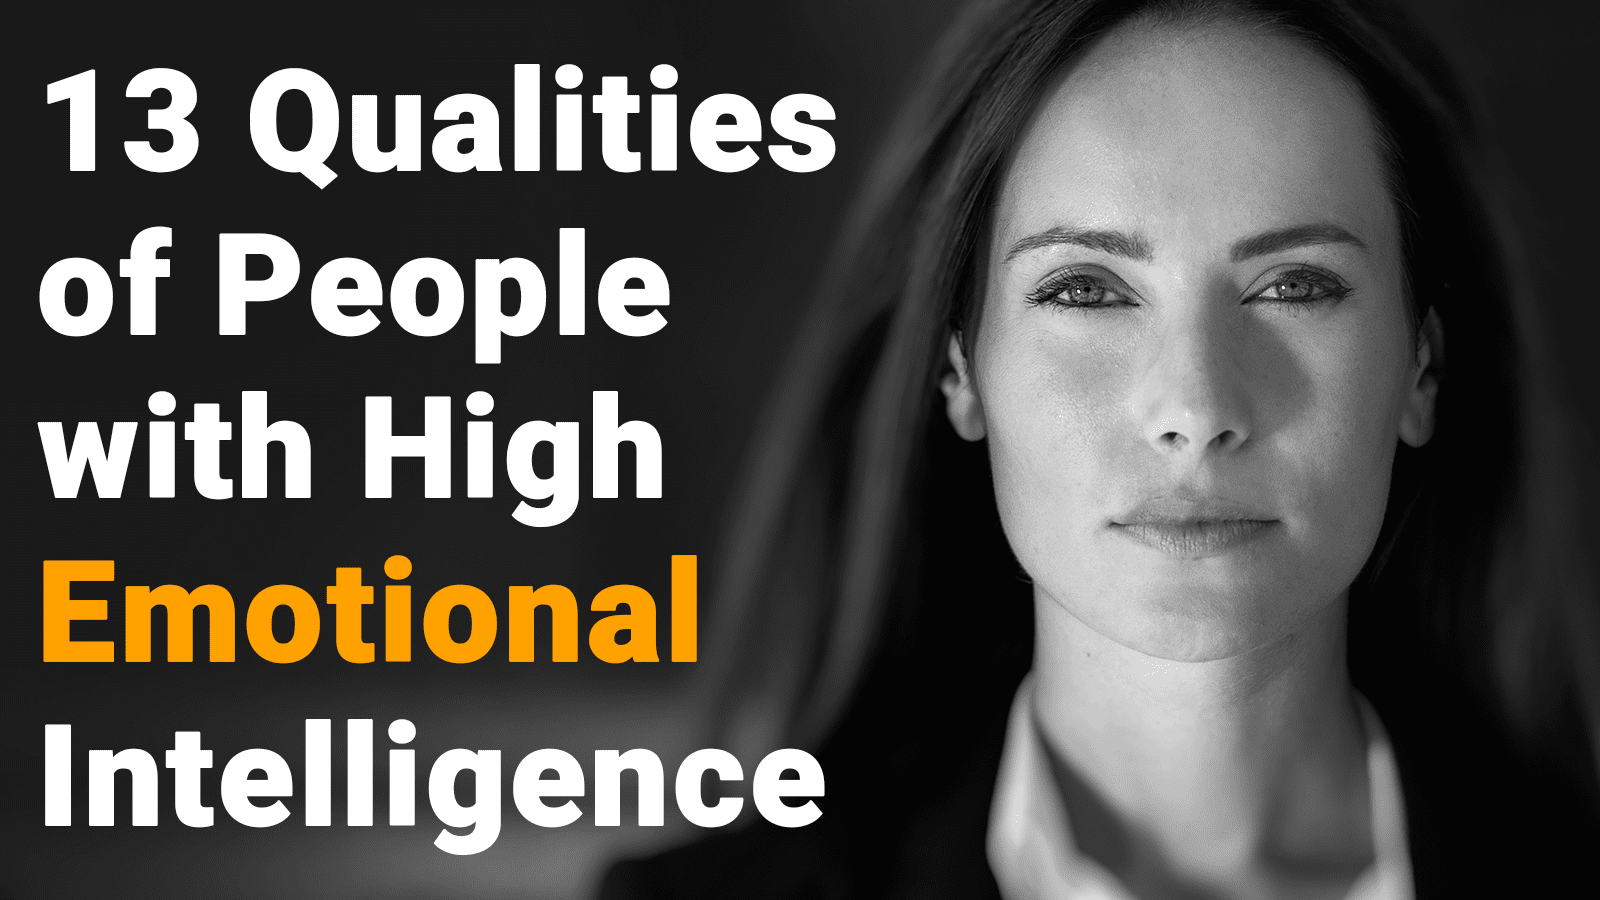 13 Qualities of People with High Emotional Intelligence